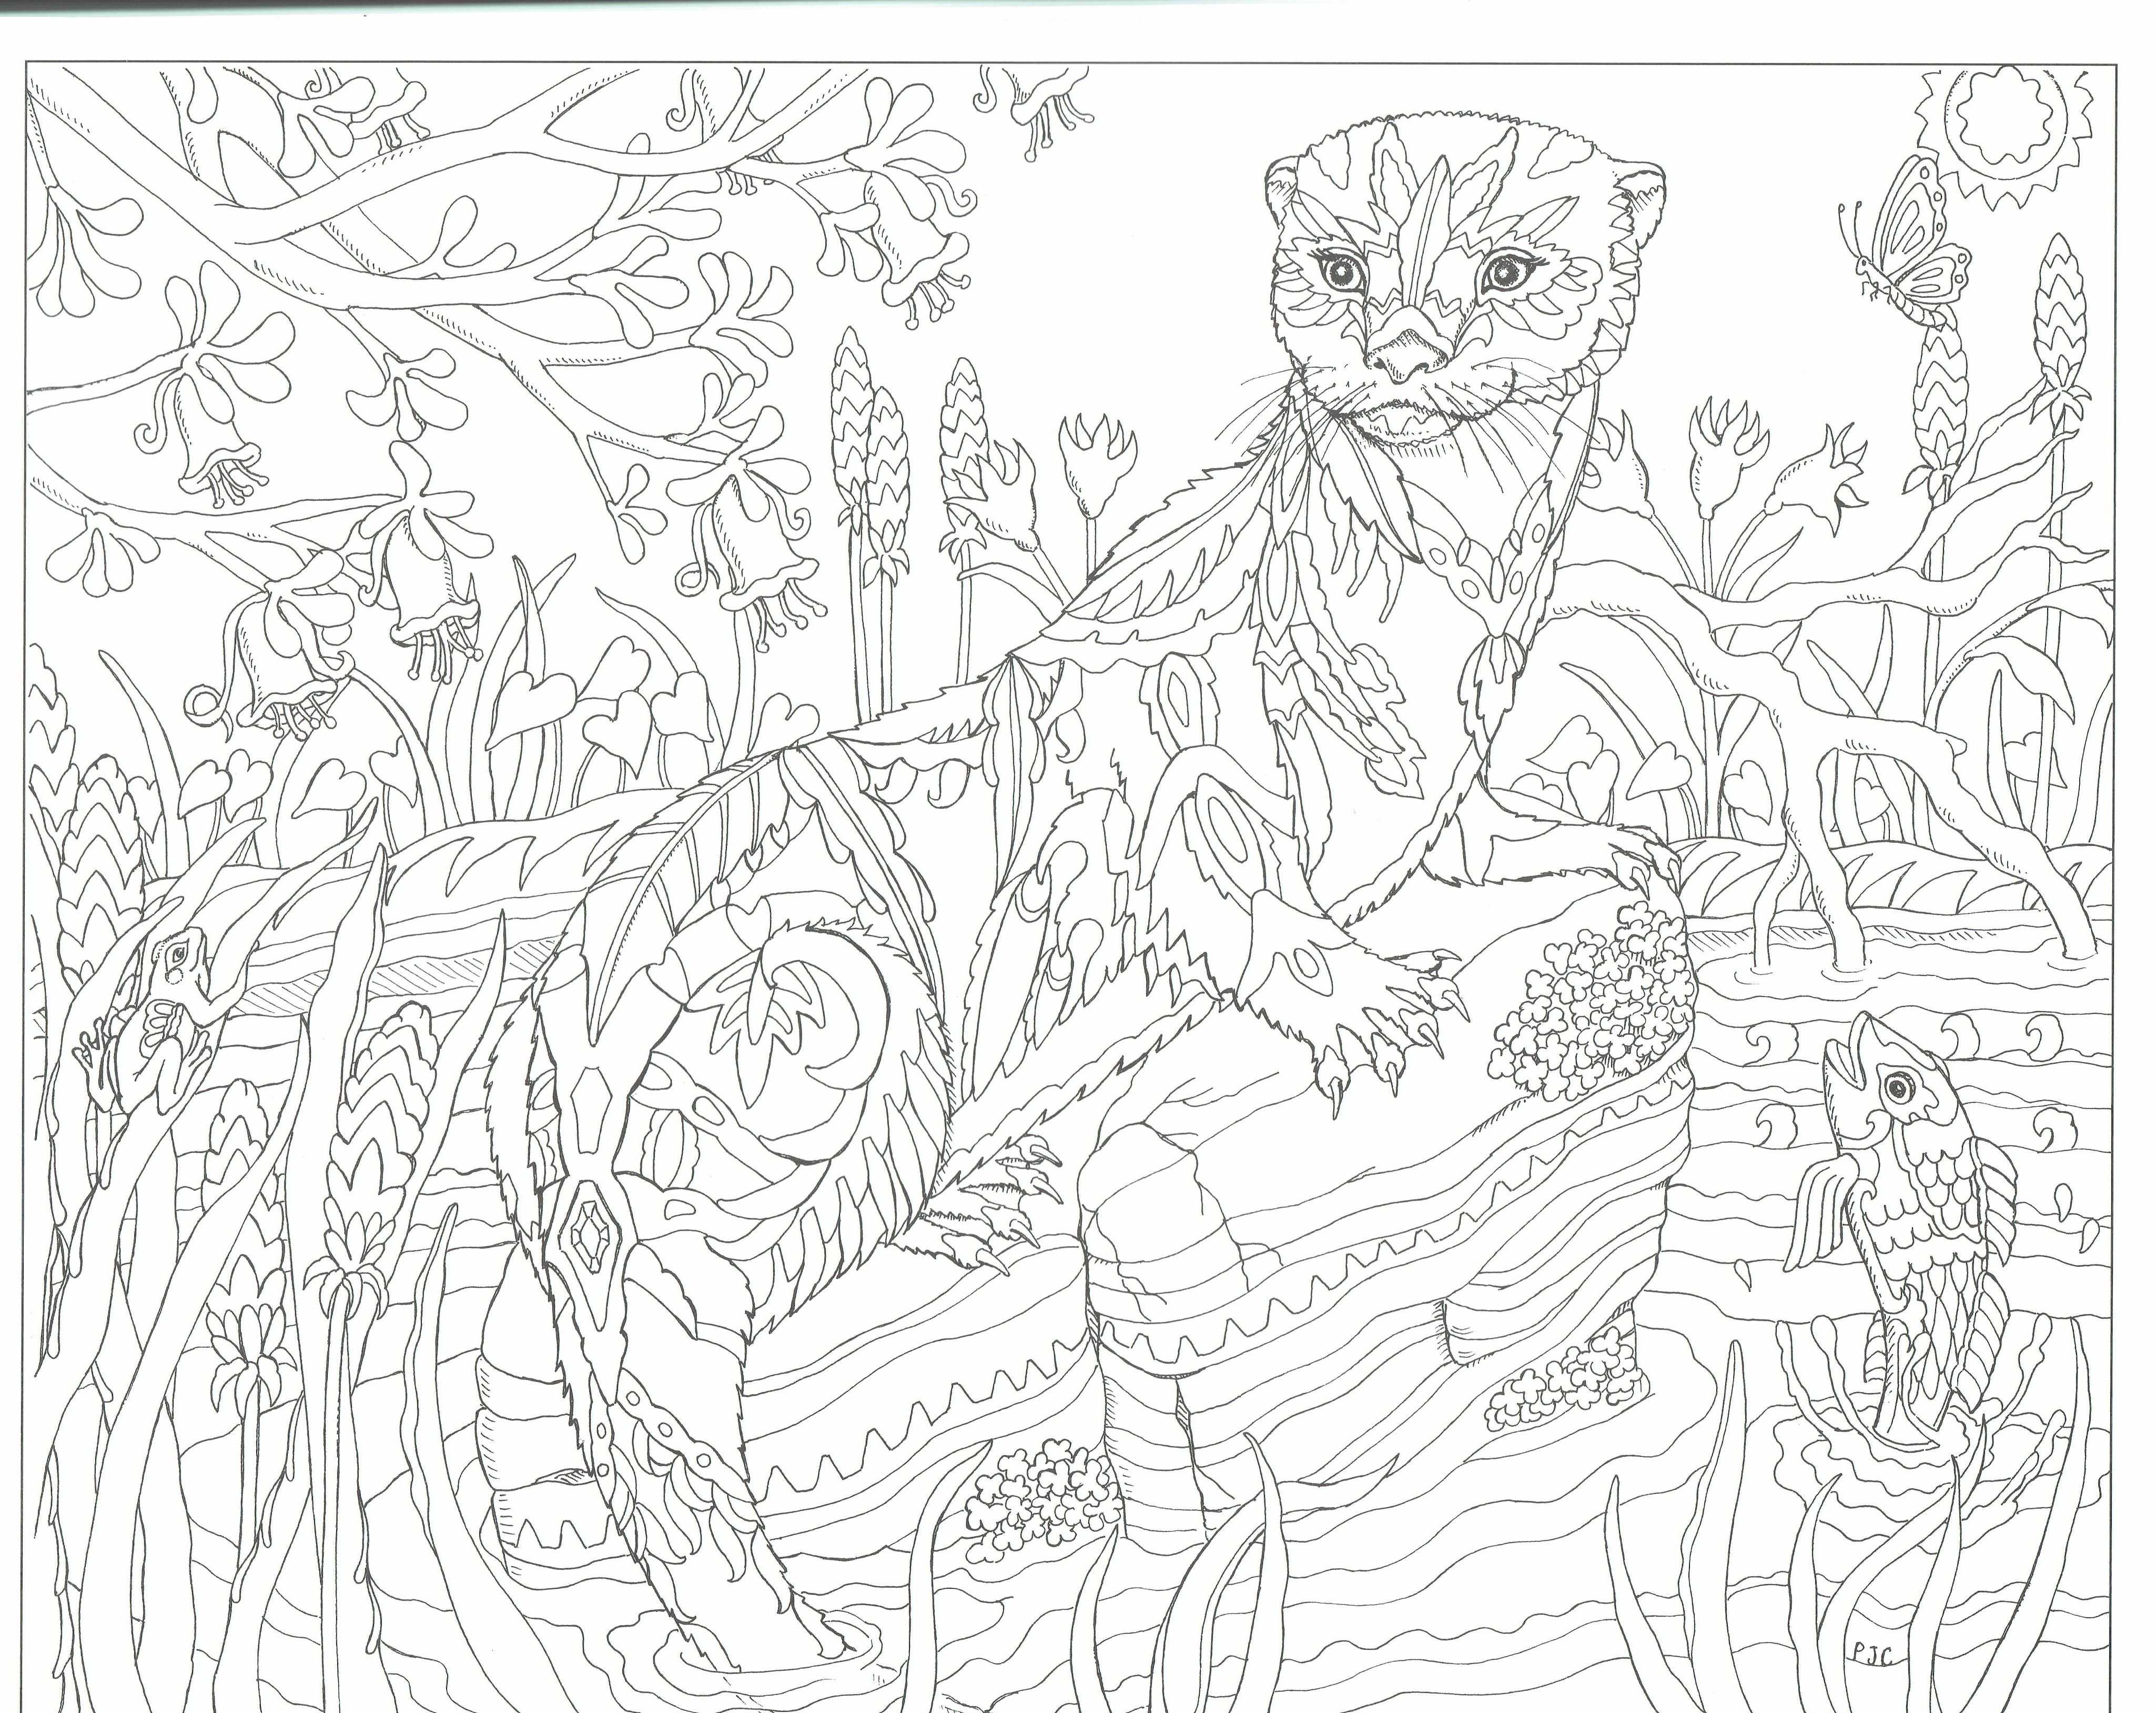 This Will Print On 11x17 Just As Nice As 8 5x11 Animal Coloring